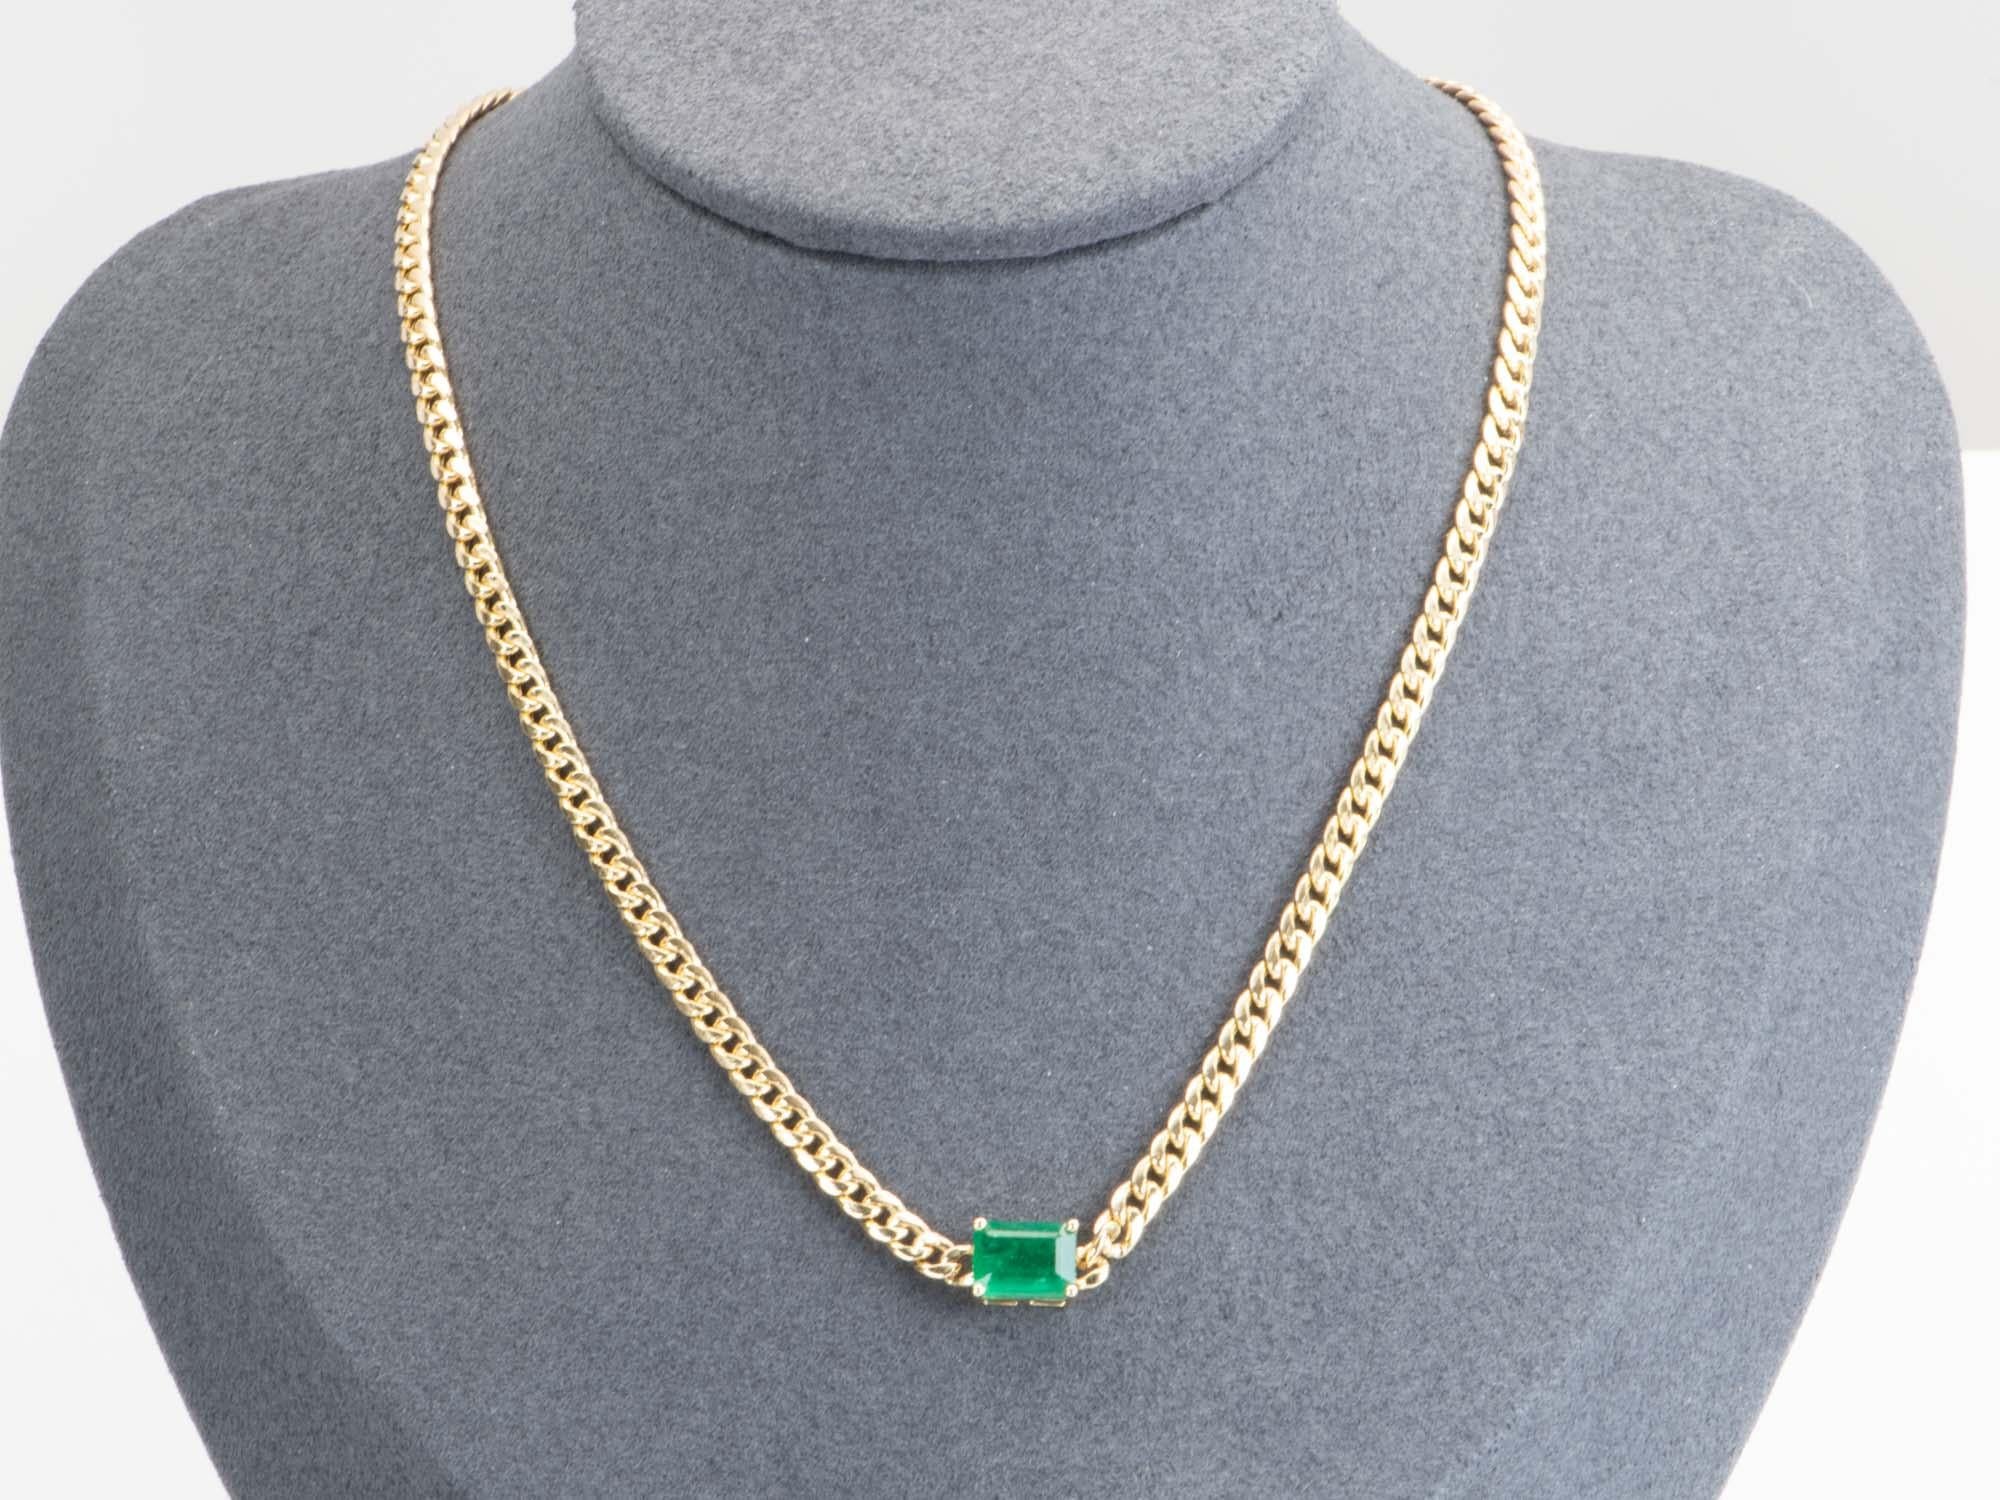   Sparkle in this timeless 1.81ct Zambian Emerald Sideways Set Necklace on a Miami Cuban Chain in 14K Gold. The minimalist and modern design showcases the rich green emerald, making this the perfect jewelry piece to add to your collection!

 ♥